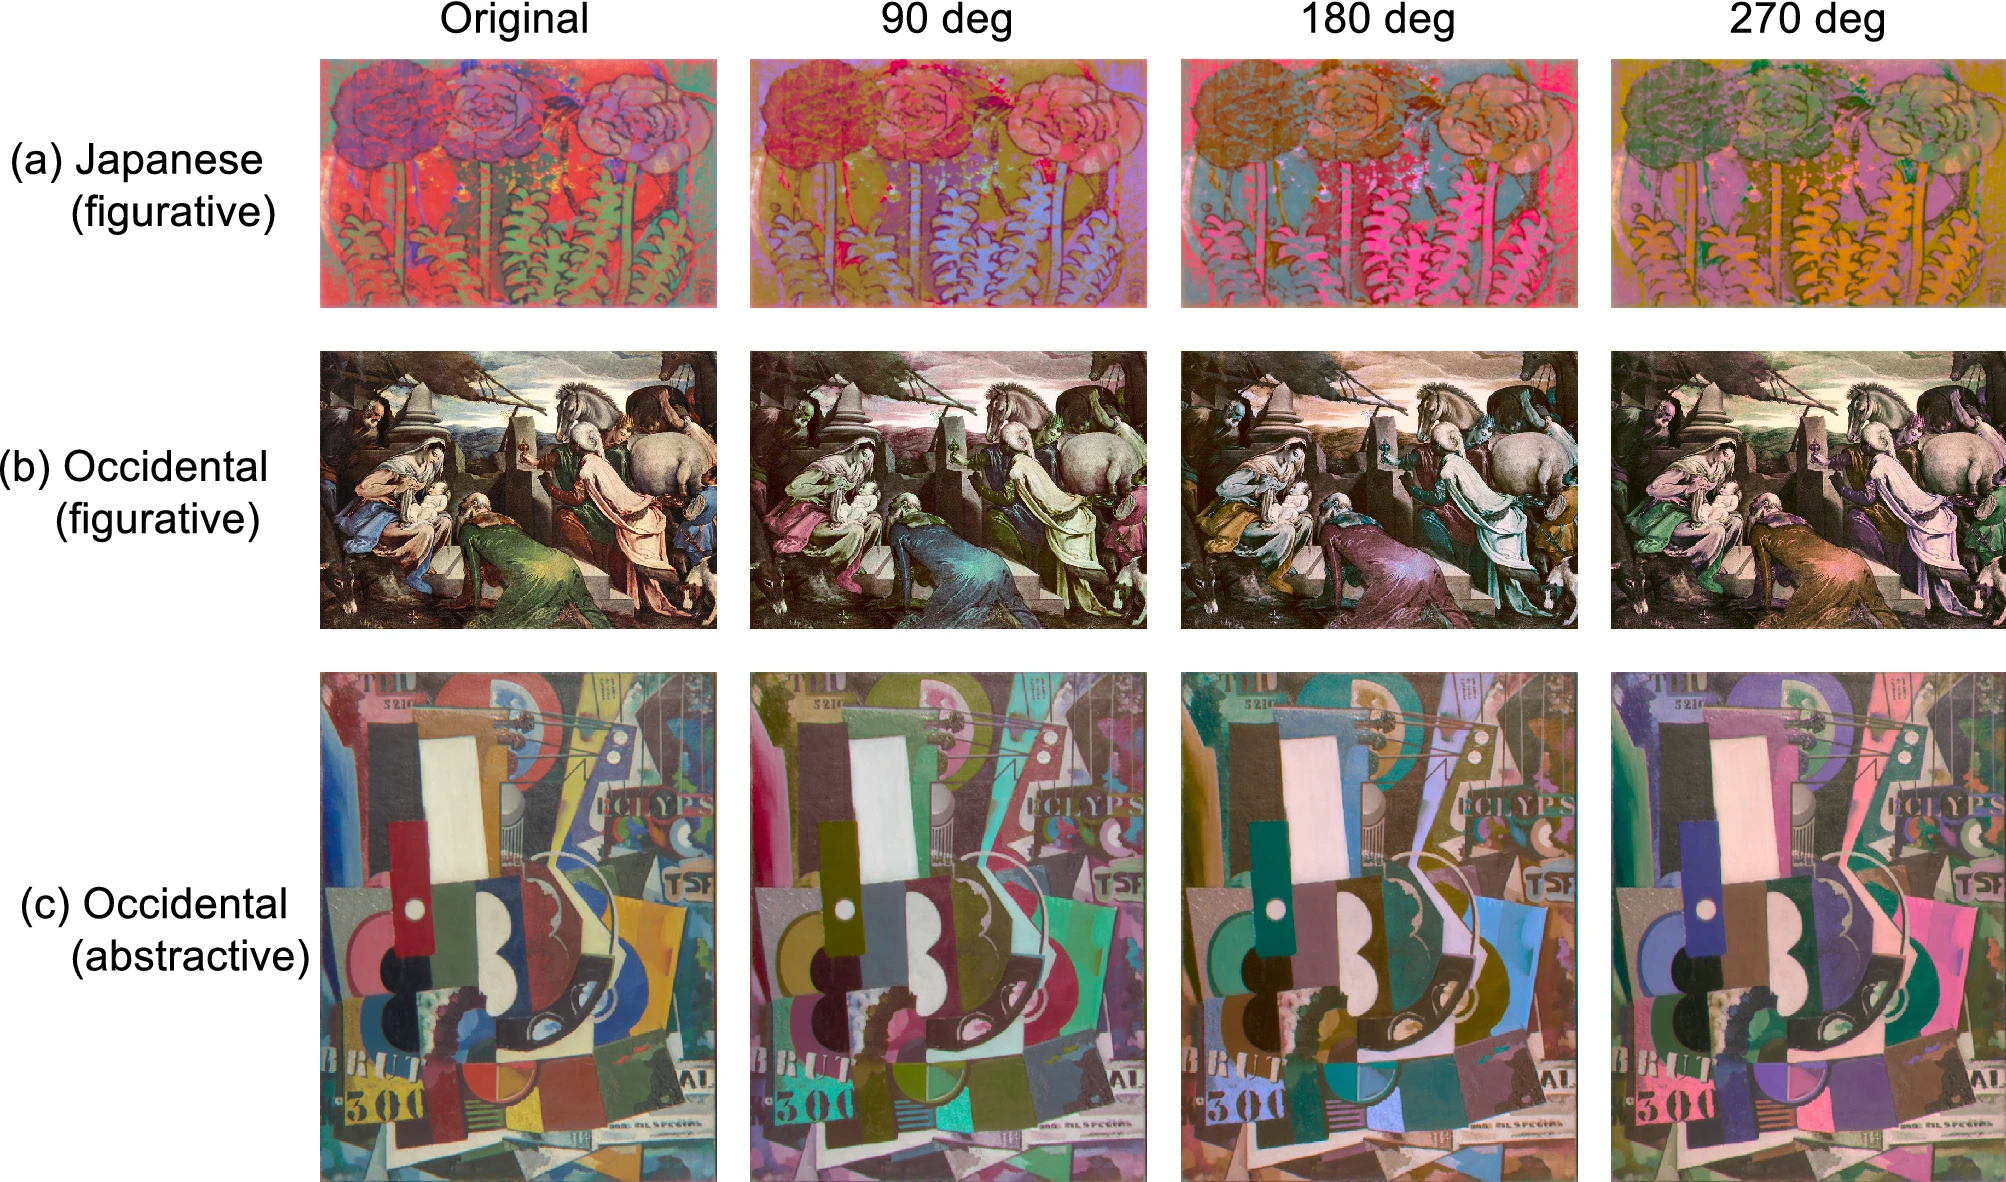 Universality Observed in Preference for Color Composition in Paintings